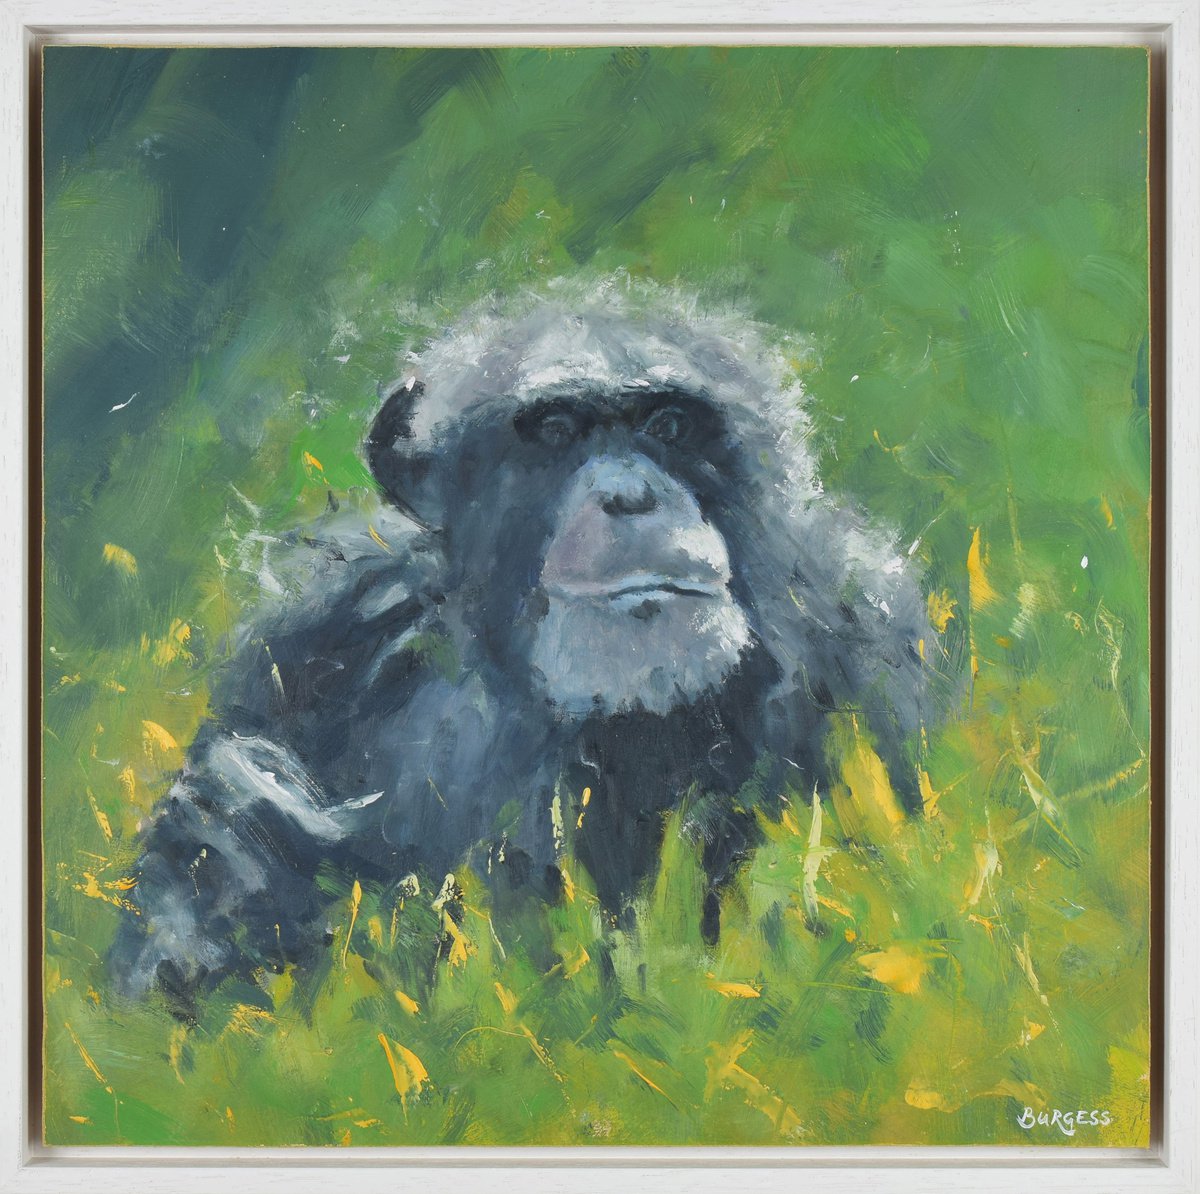 Curious - Framed Monkey Wildlife Oil Painting On Canvas by Shaun Burgess